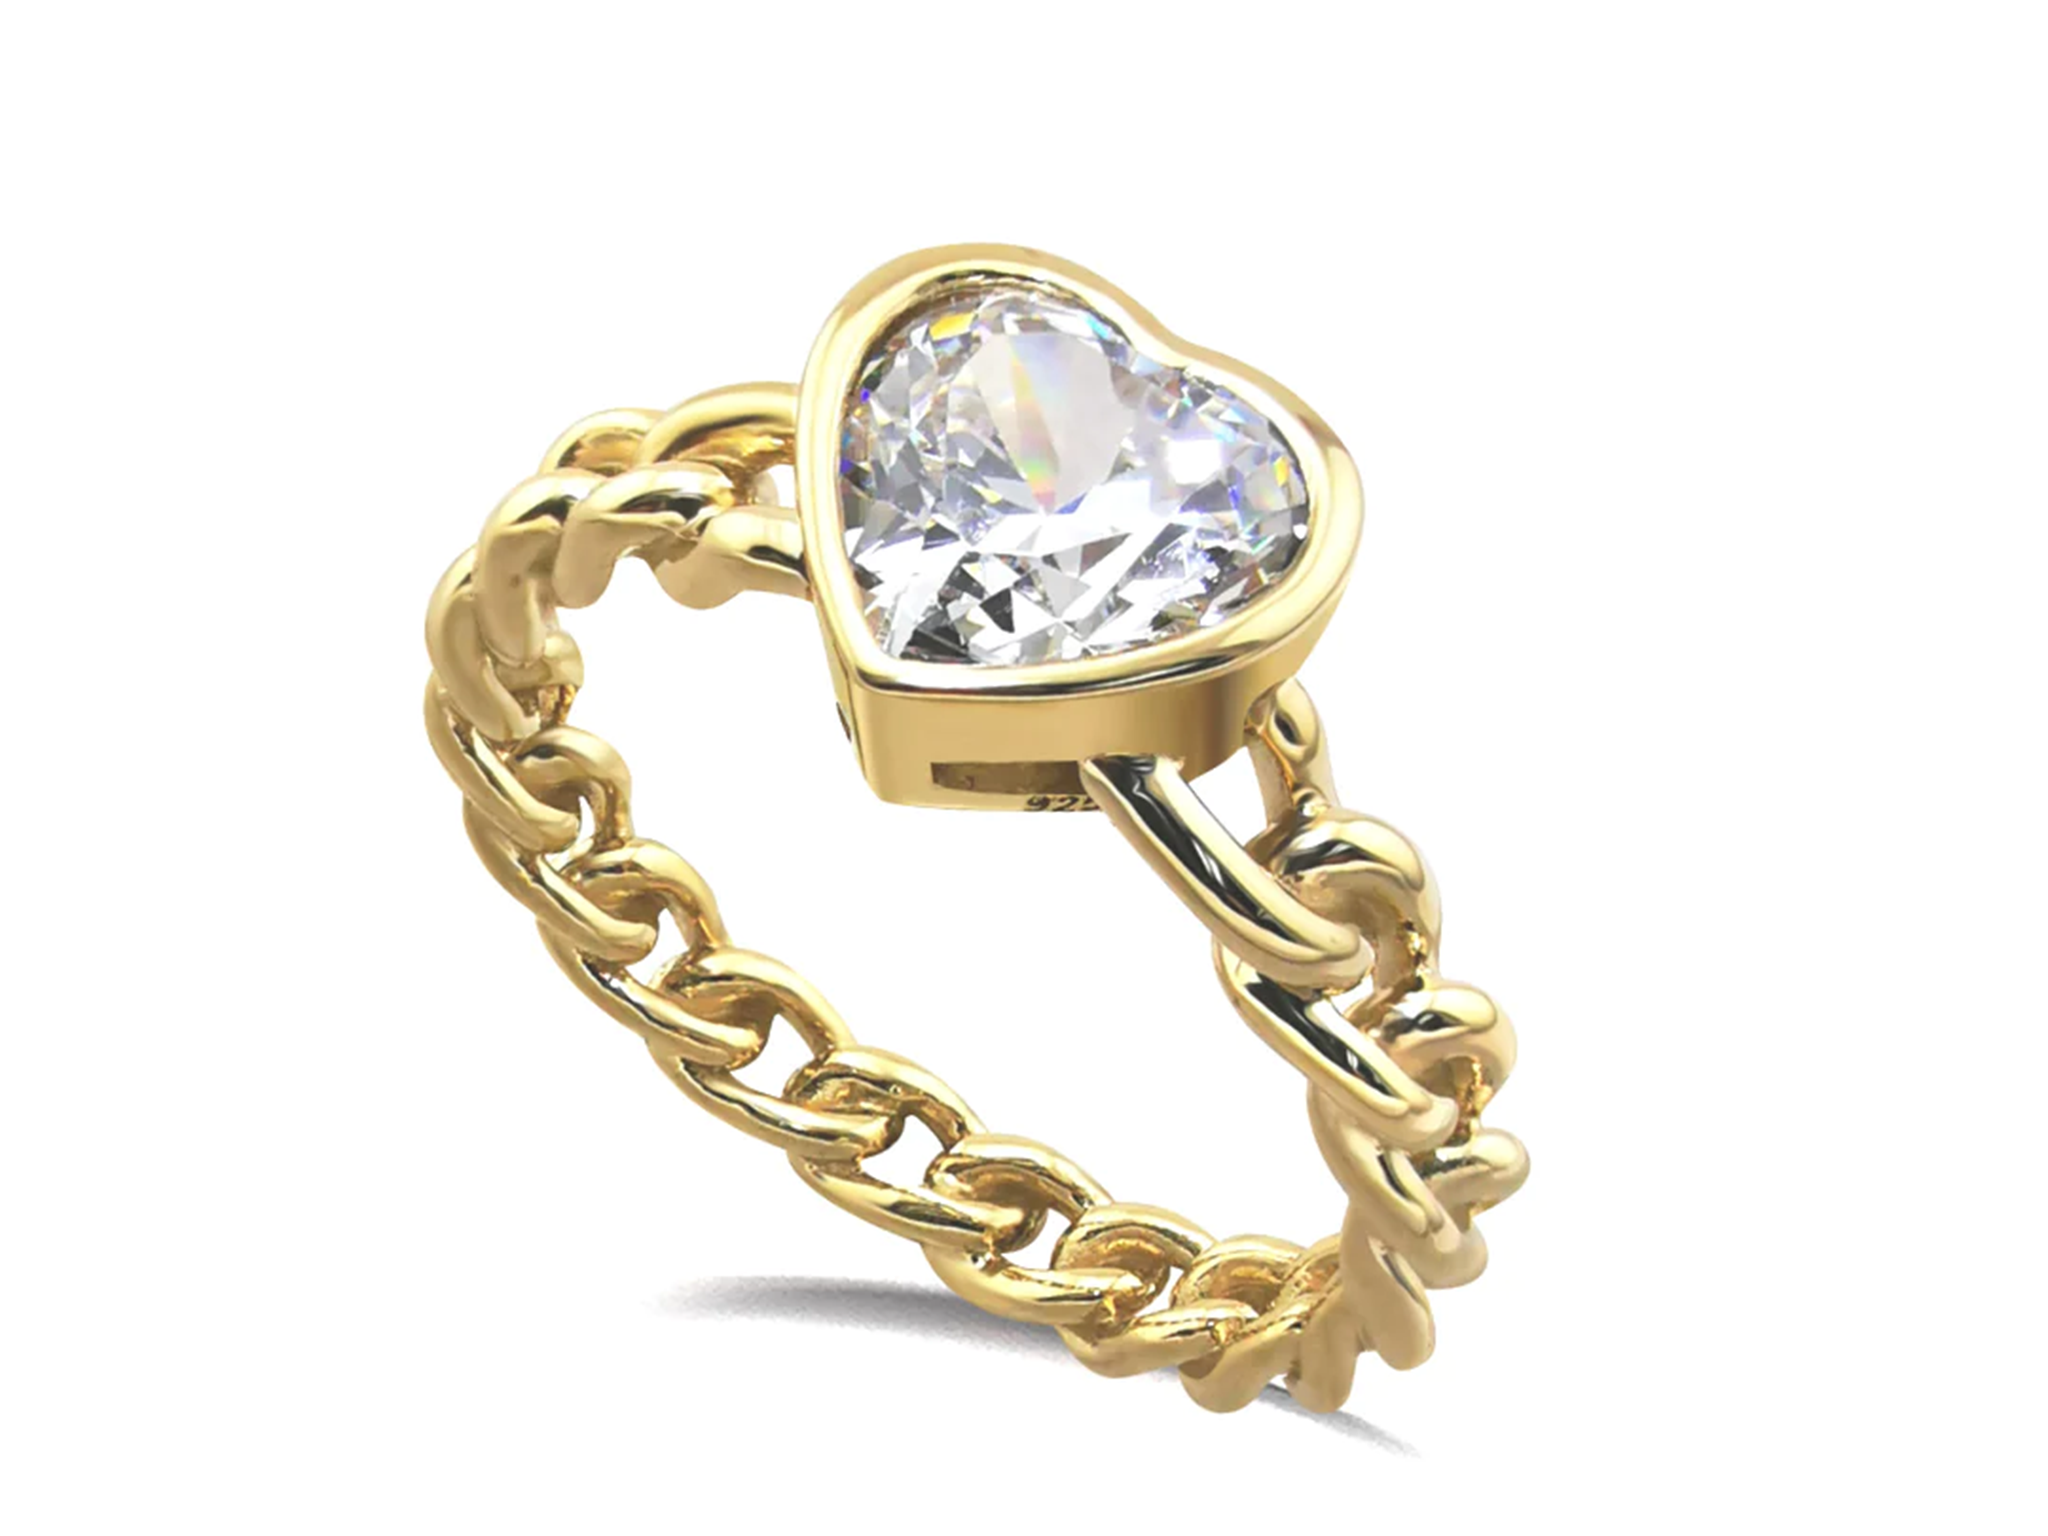   valentines-day-jewellery-gifts-indybest.png 